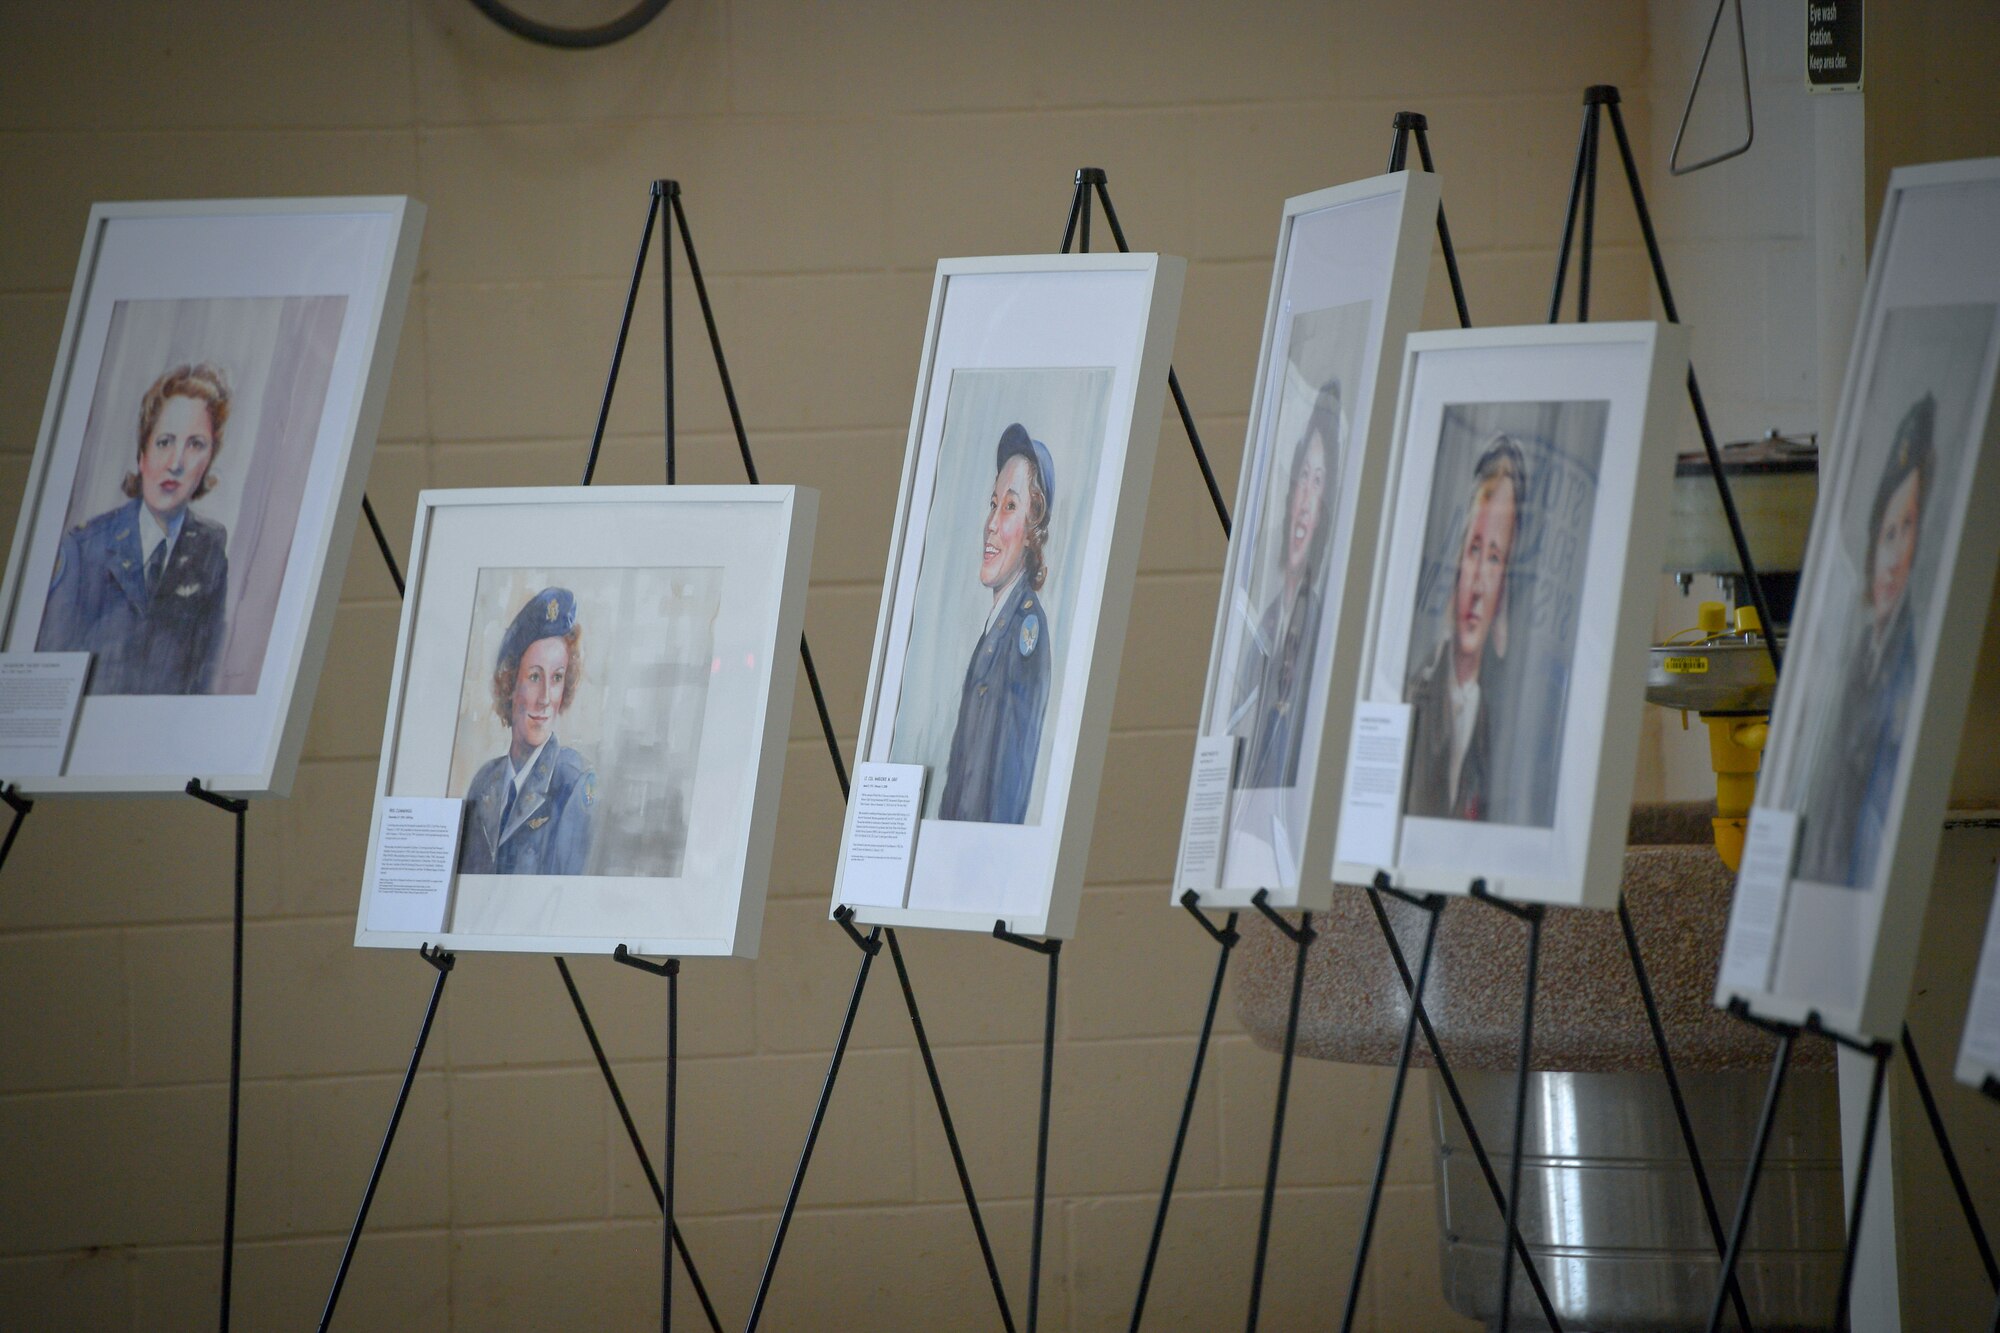 Painted portraits of past Women Airforce Service Pilots are displayed in the hangar at Dyess Air Force Base, Texas, April 29, 2022. The Women’s Summit celebrated the 80th anniversaries of the Women Airforce Service Pilots program or WASPs, 8th Air Force, and the 317th Airlift Wing.(U.S. Air Force Photos by Staff Sgt. Nije Hightower)